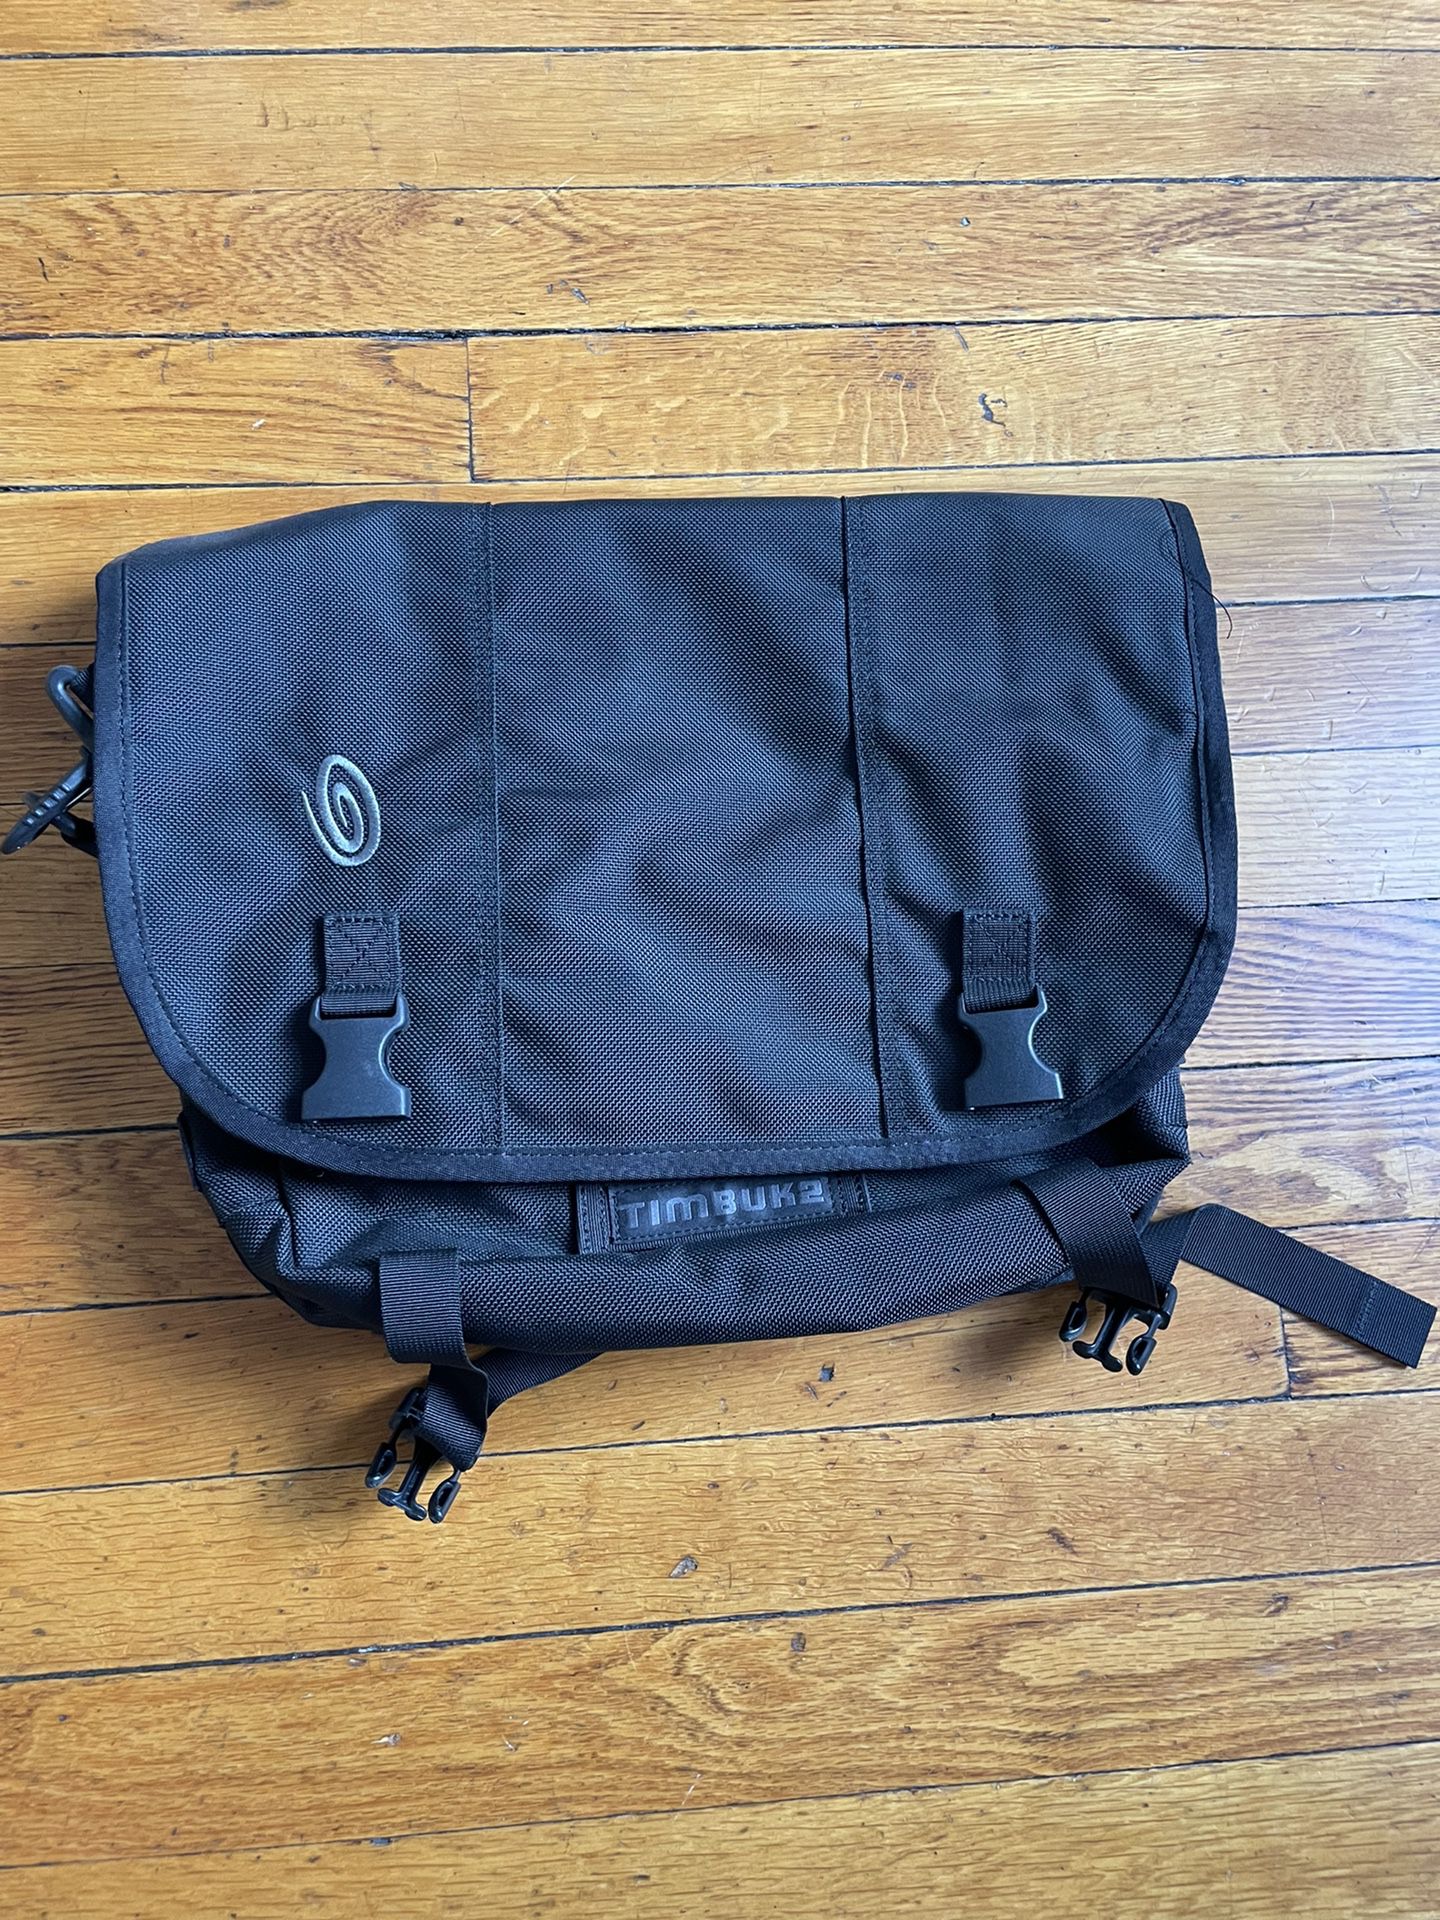 Timbuk2 Shift Bike Pannier/Messenger Bag for Sale in New York, NY - OfferUp